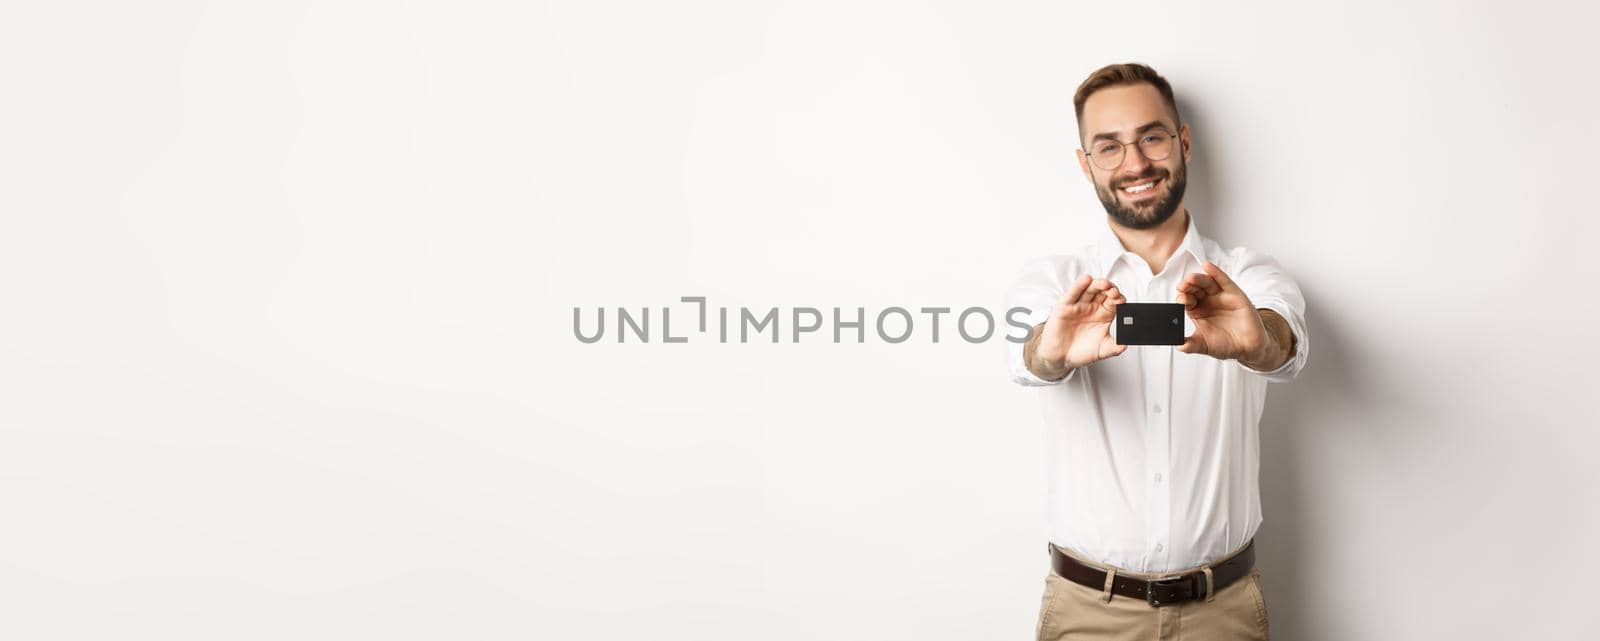 Handsome man in glasses holding a credit card, smiling pleased, standing over white background.